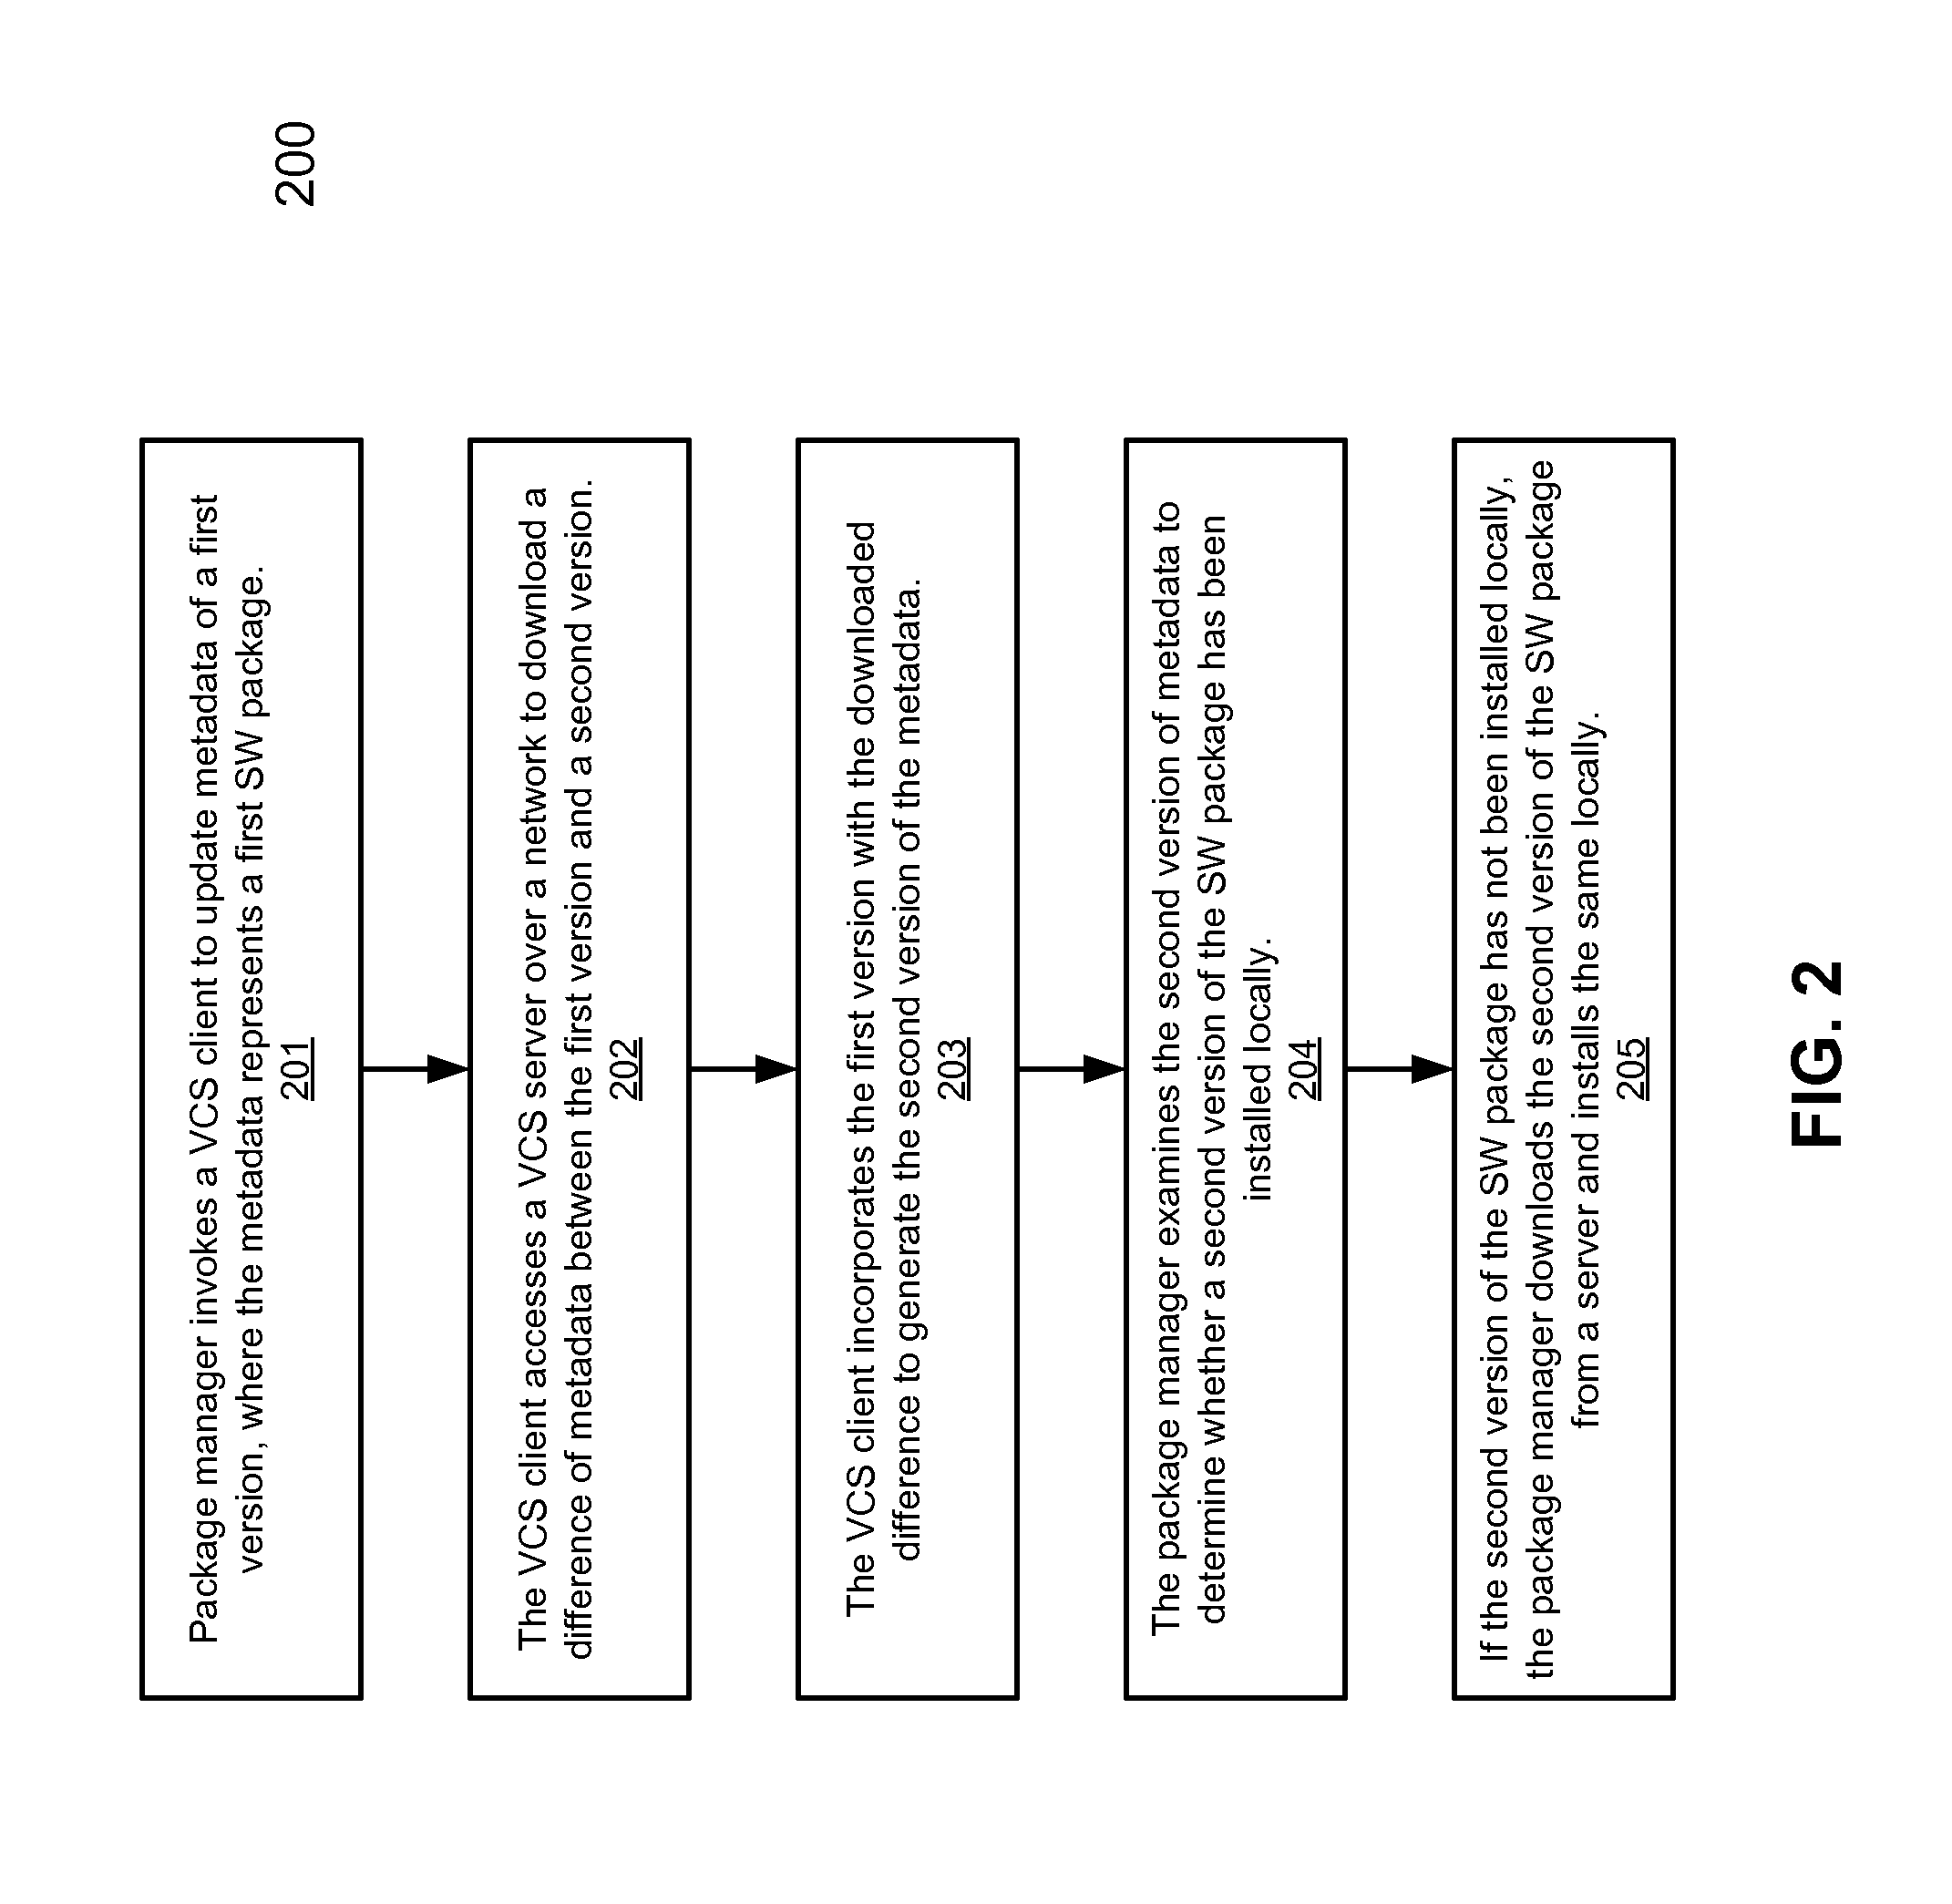 Methods for managing software packages using a version control system